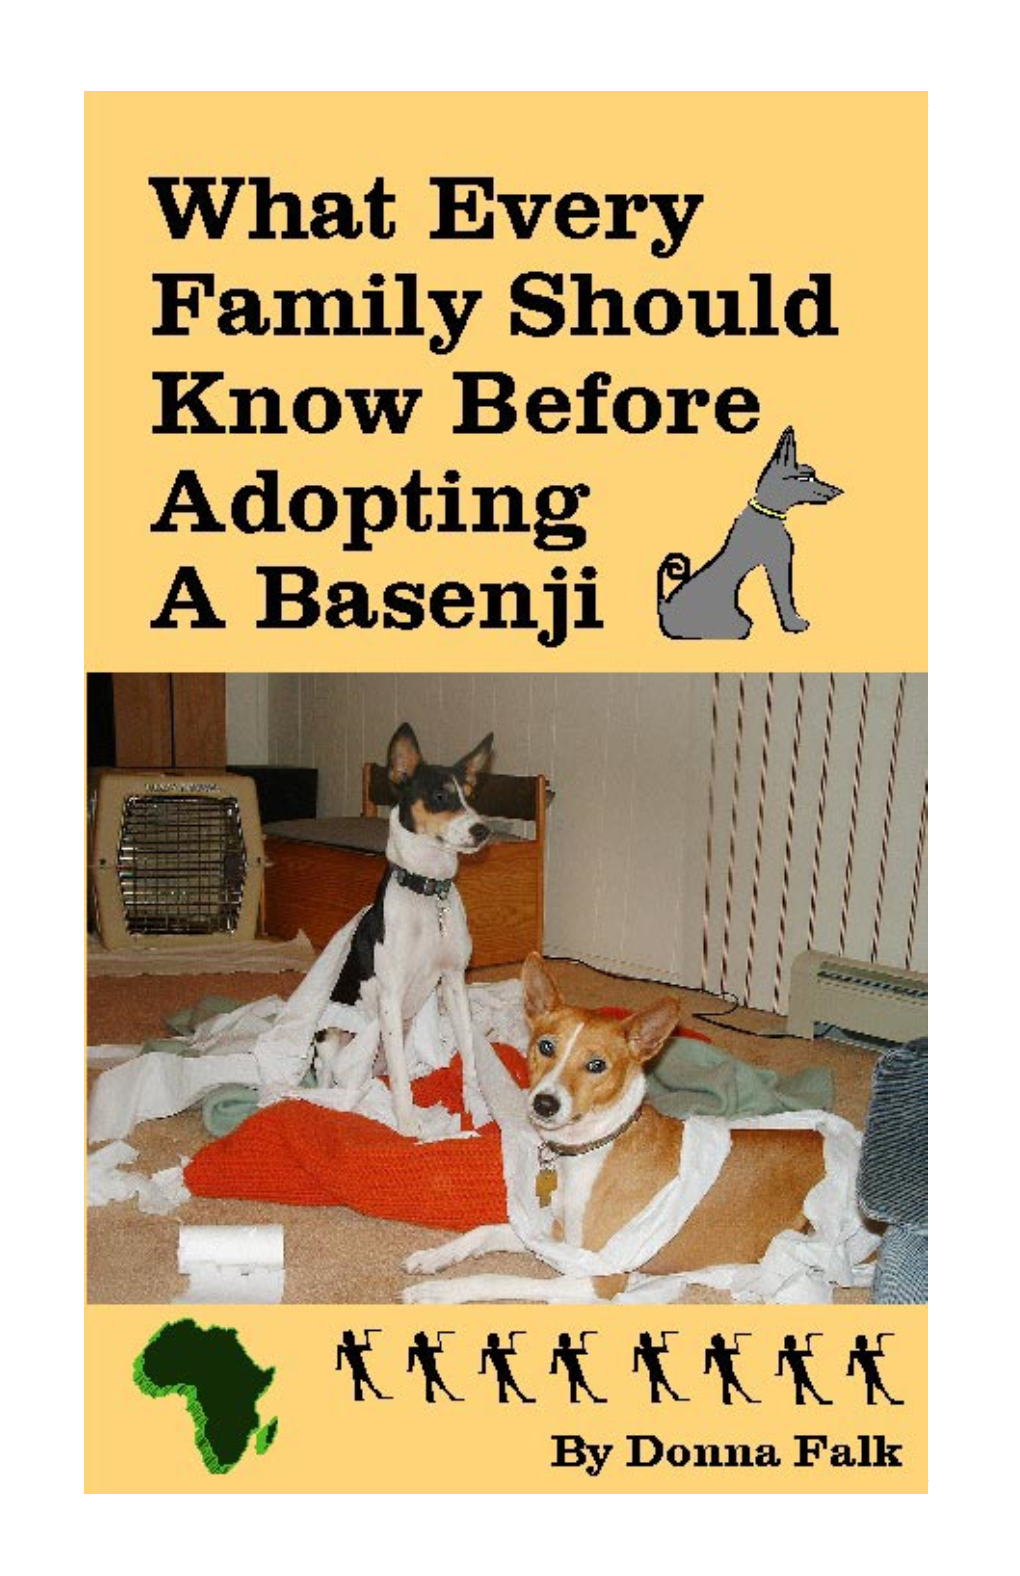 What Every Family Should Know Before Adopting a Basenji